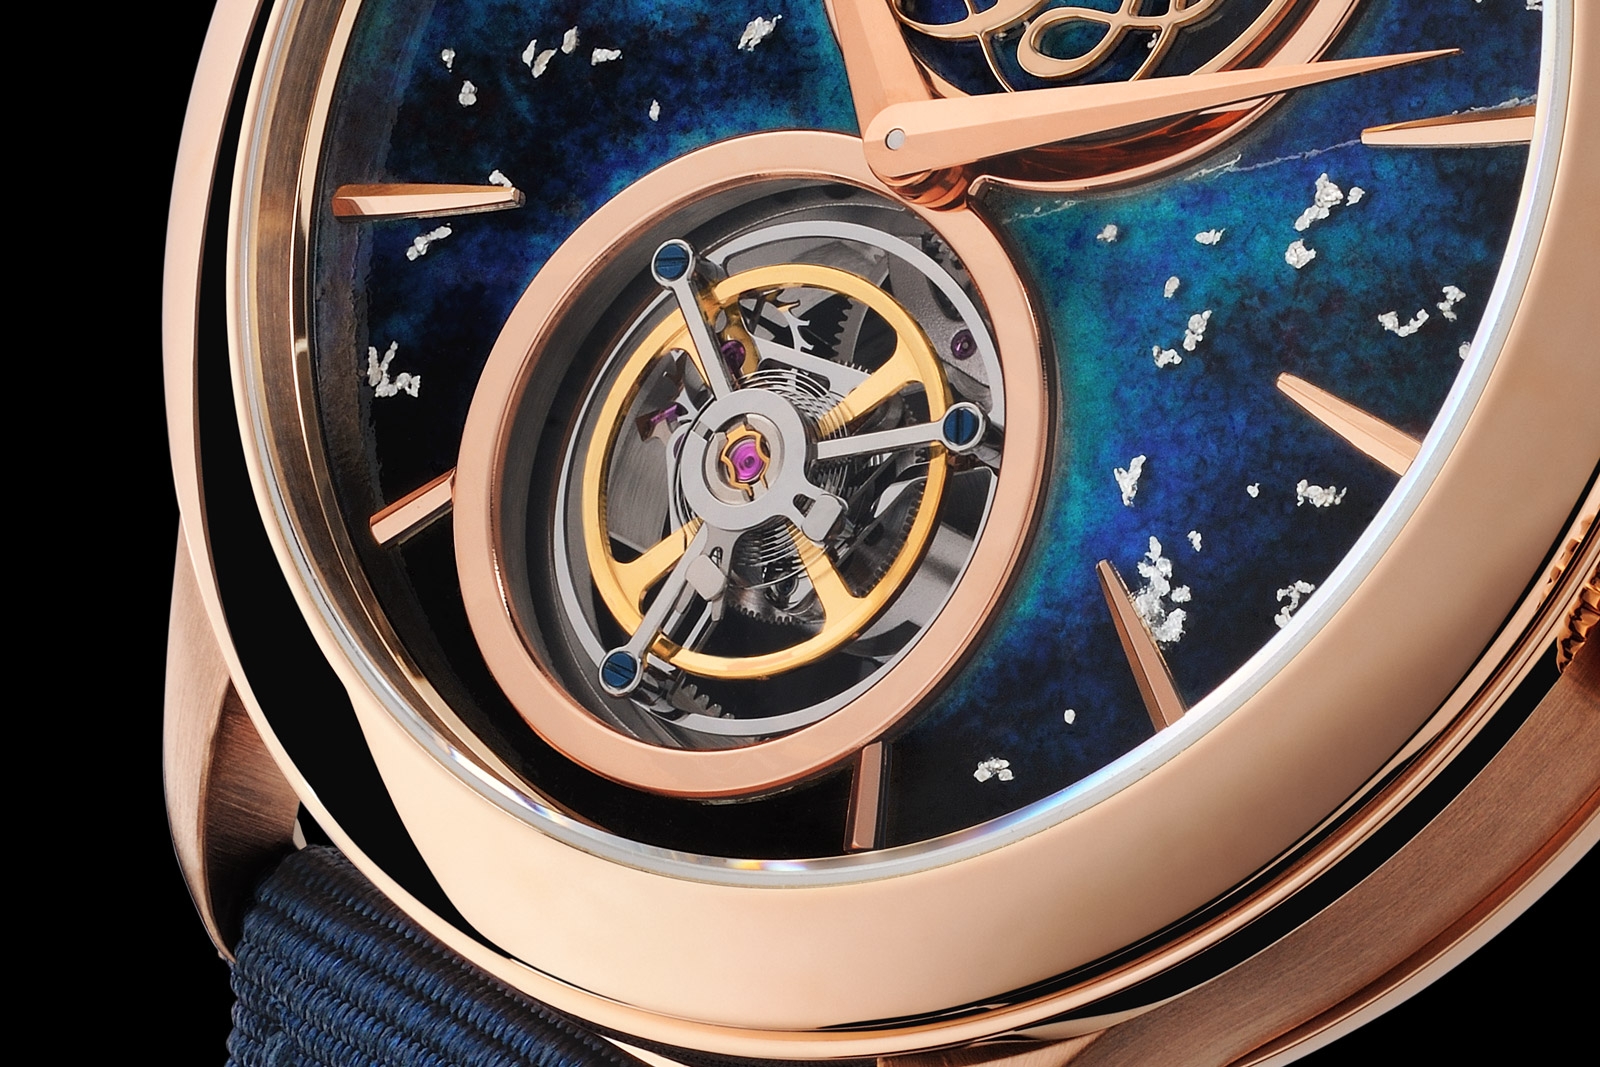 Đồng hồ Charles Girardier 1809 Tribute to Jackson Pollock Only Watch 2021